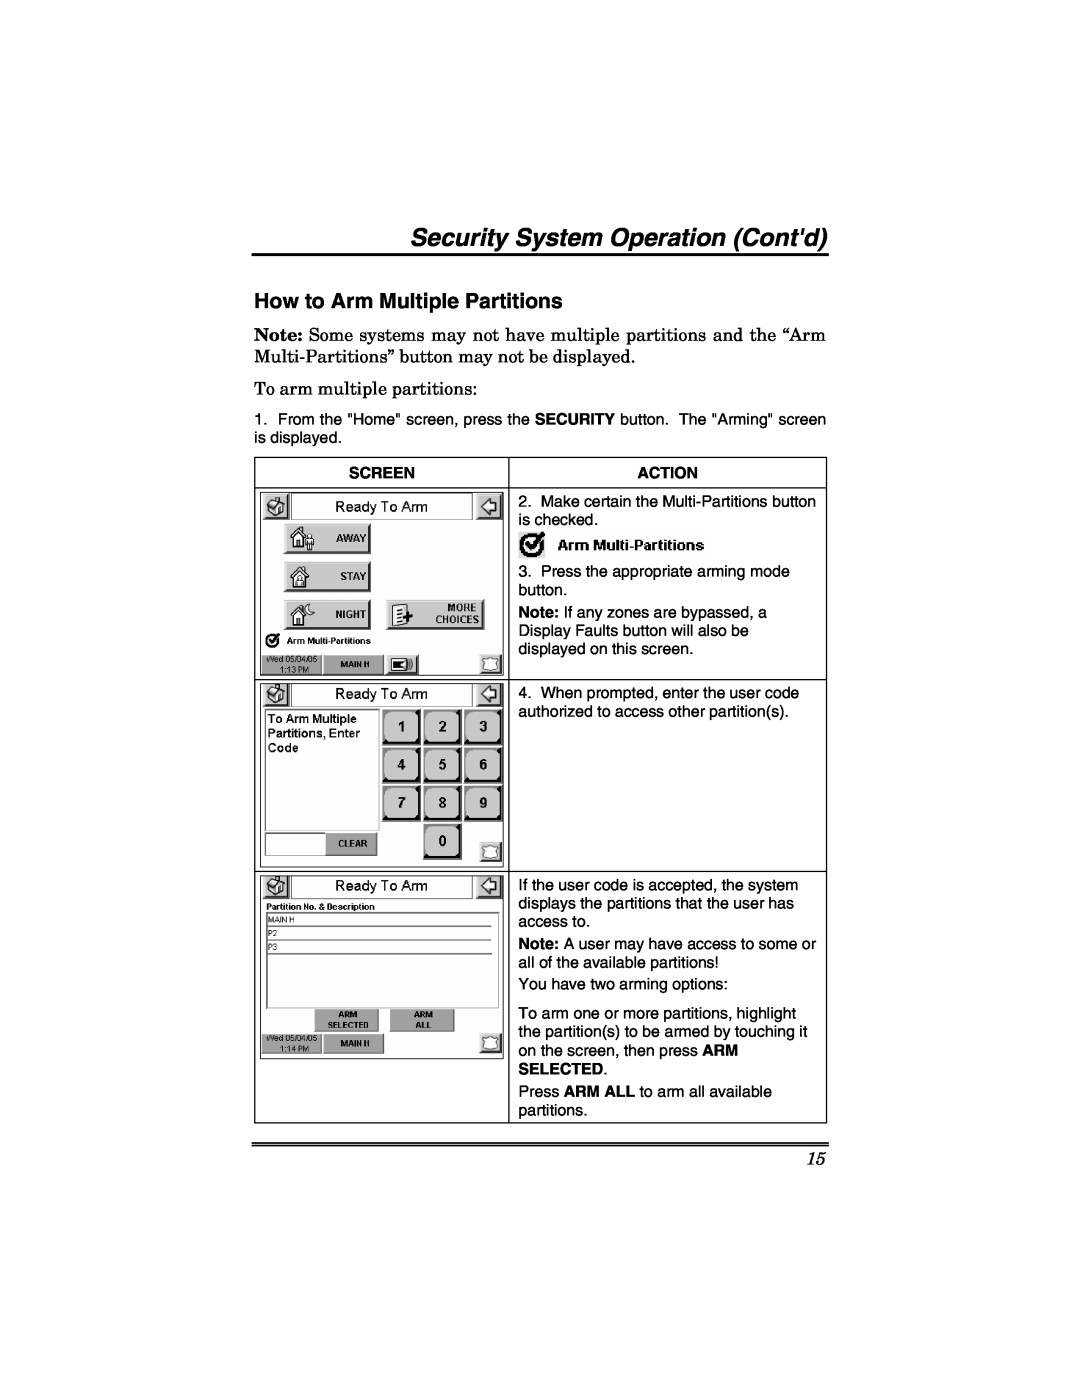 Honeywell 6271V manual Security System Operation Contd, How to Arm Multiple Partitions, Screen, Action, Selected 